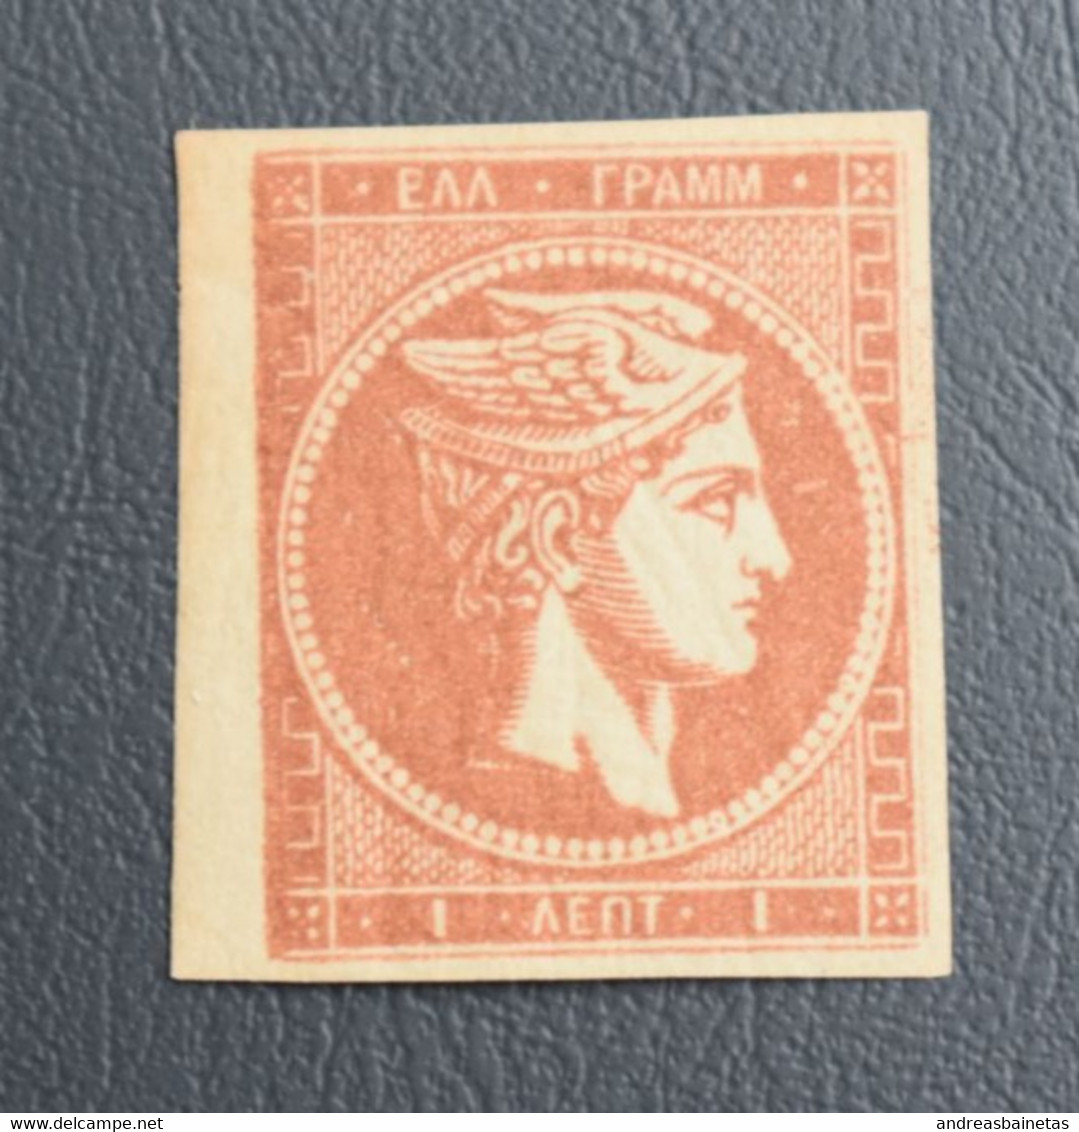 Stamps GREECE Large  Hermes Heads 1 Lepton LH  1880-1886 - Nuovi